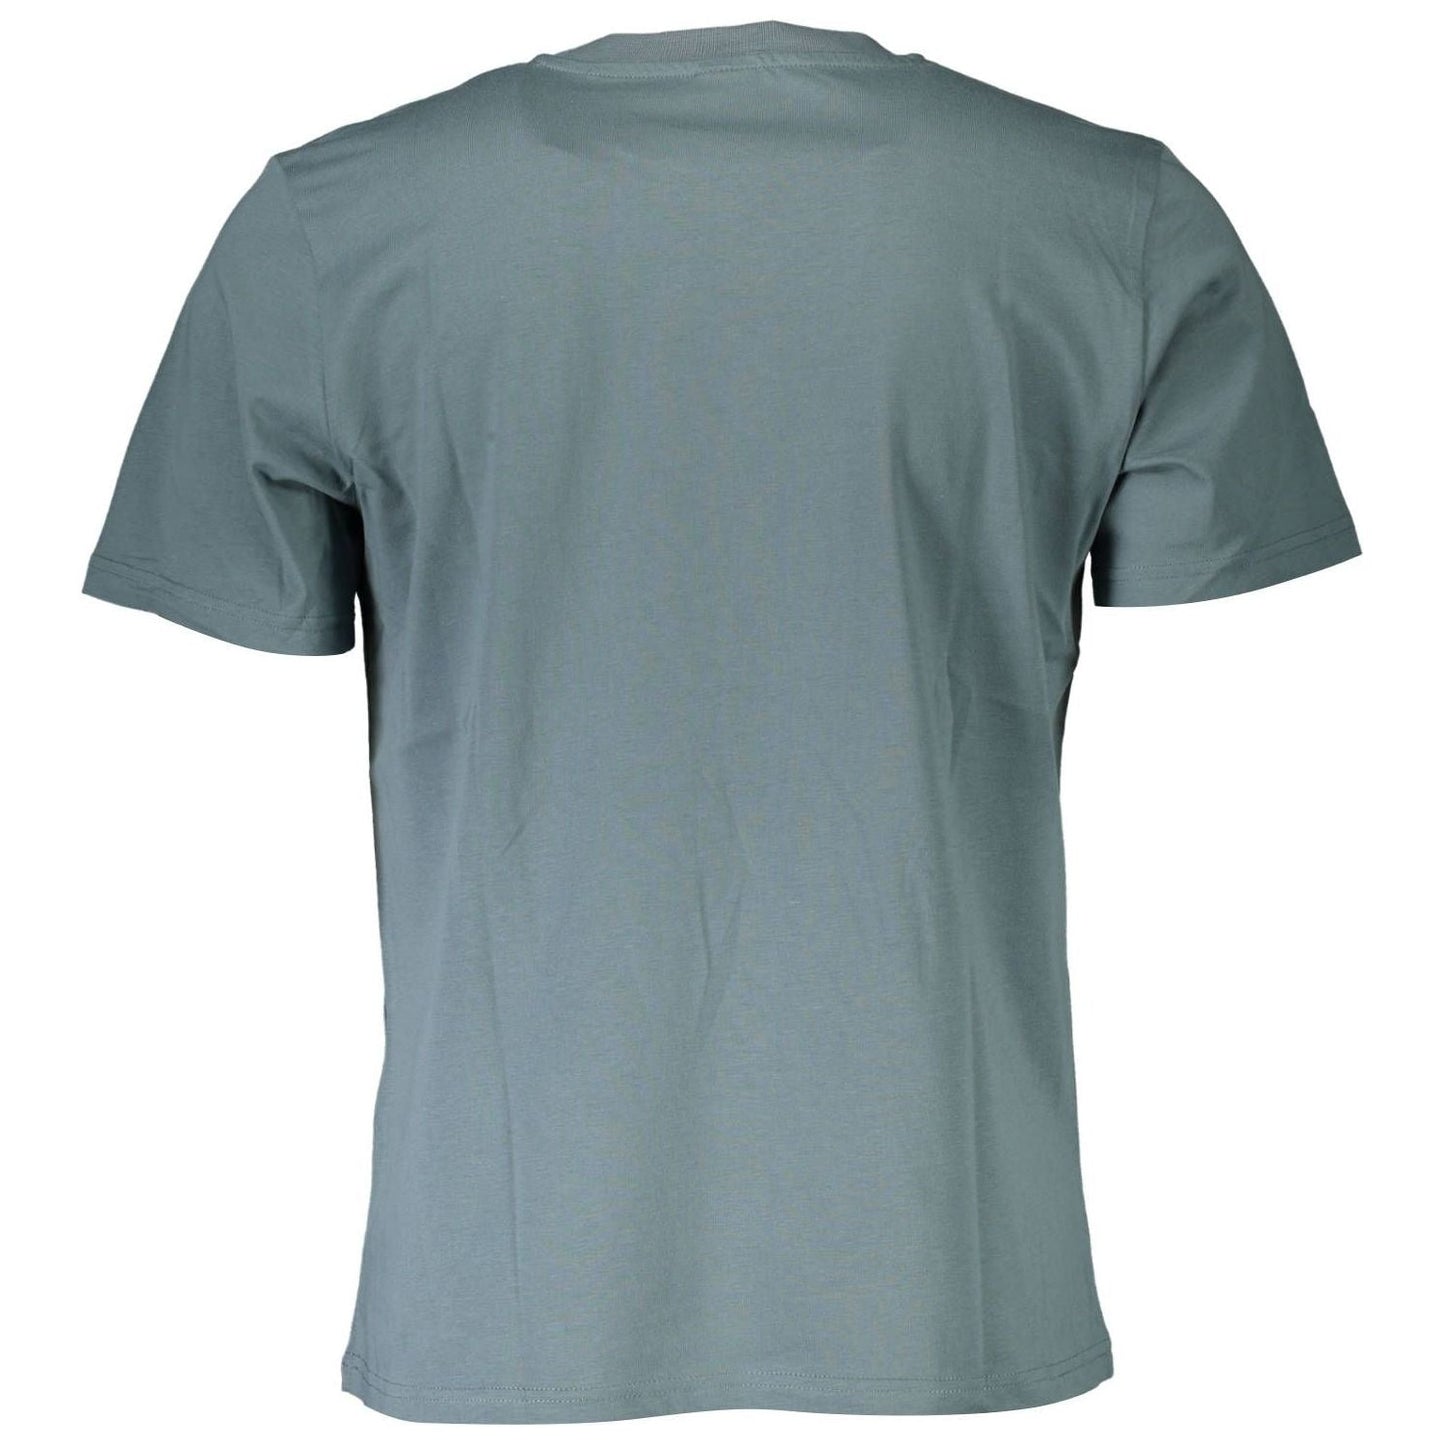 North Sails Chic Green Round Neck Tee with Logo Detail chic-green-round-neck-tee-with-logo-detail